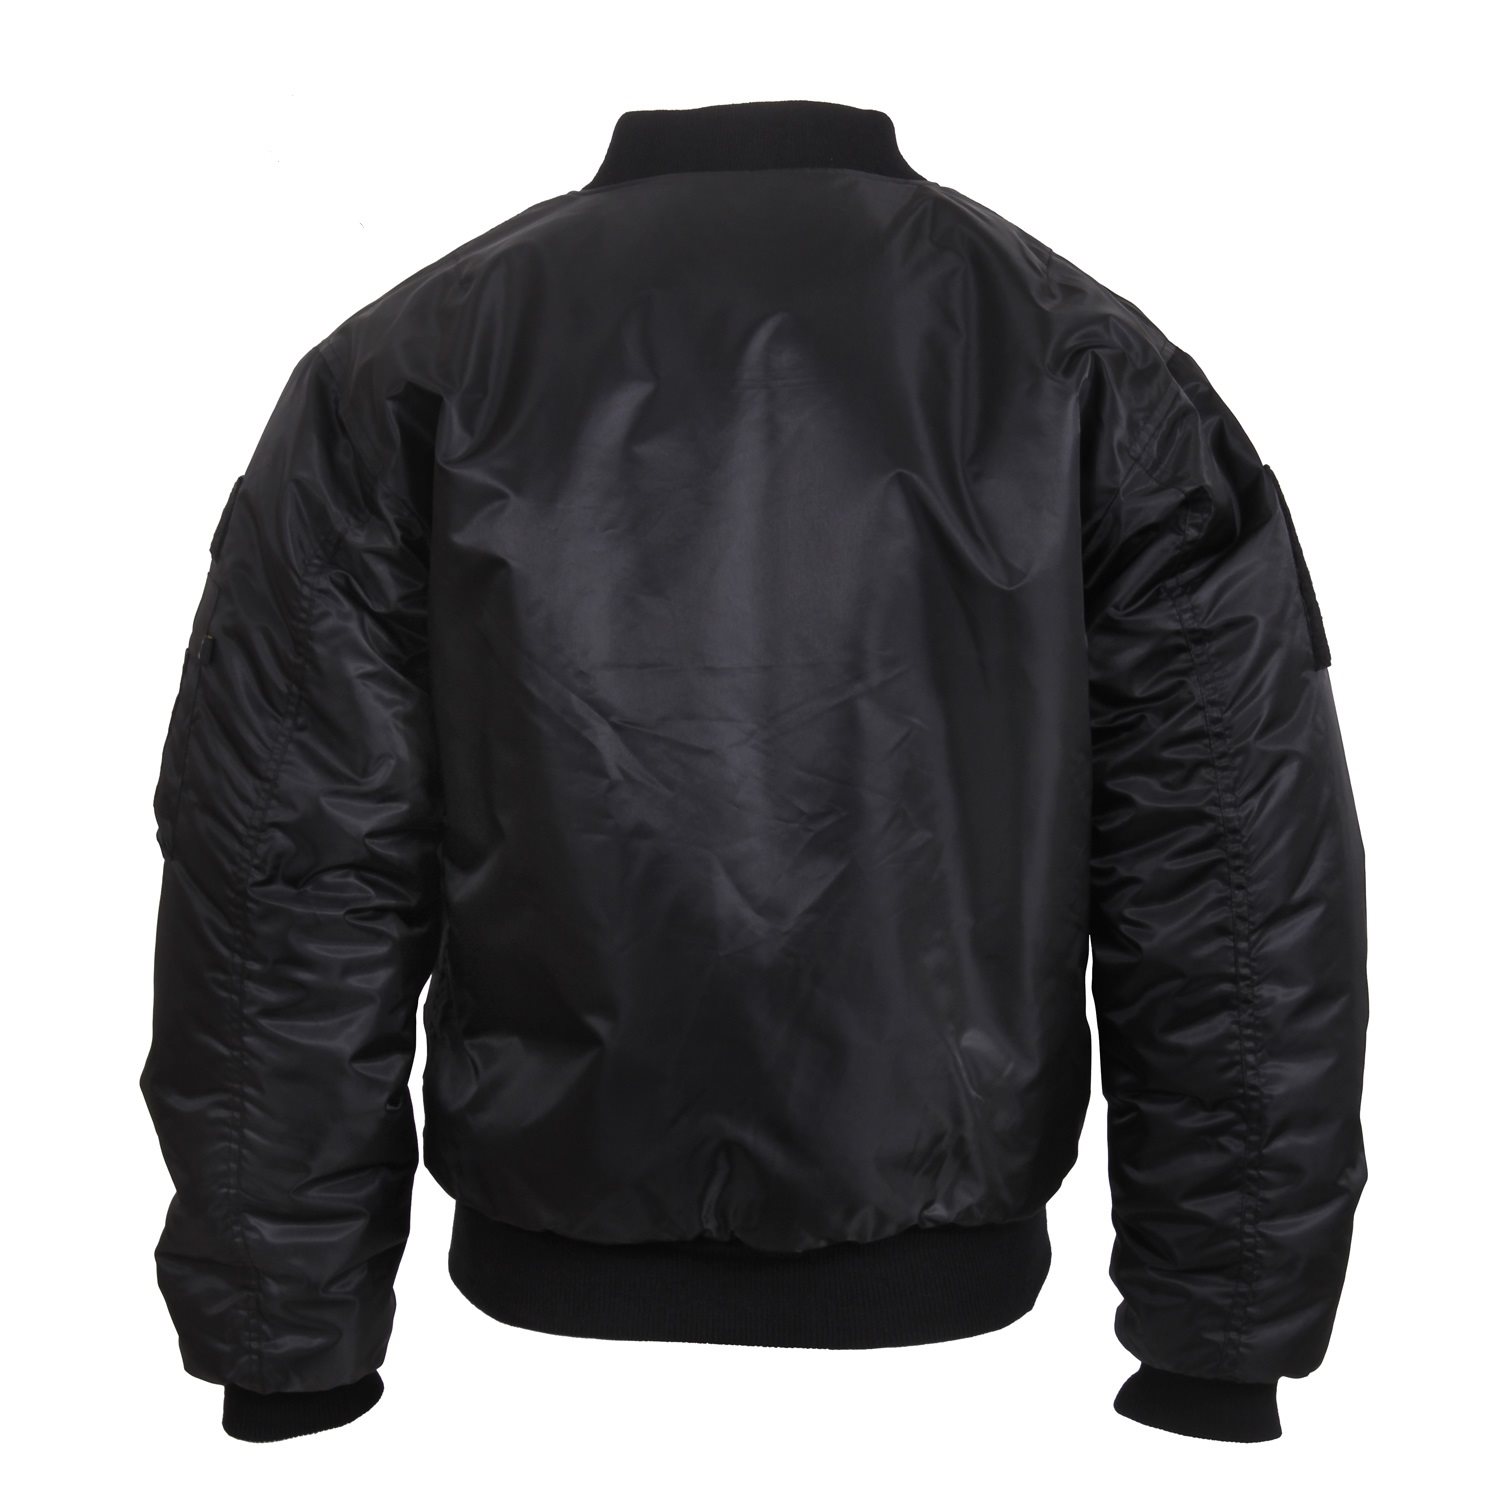 Jacket with patches MA1 FLIGHT BLACK ROTHCO 7250 L-11